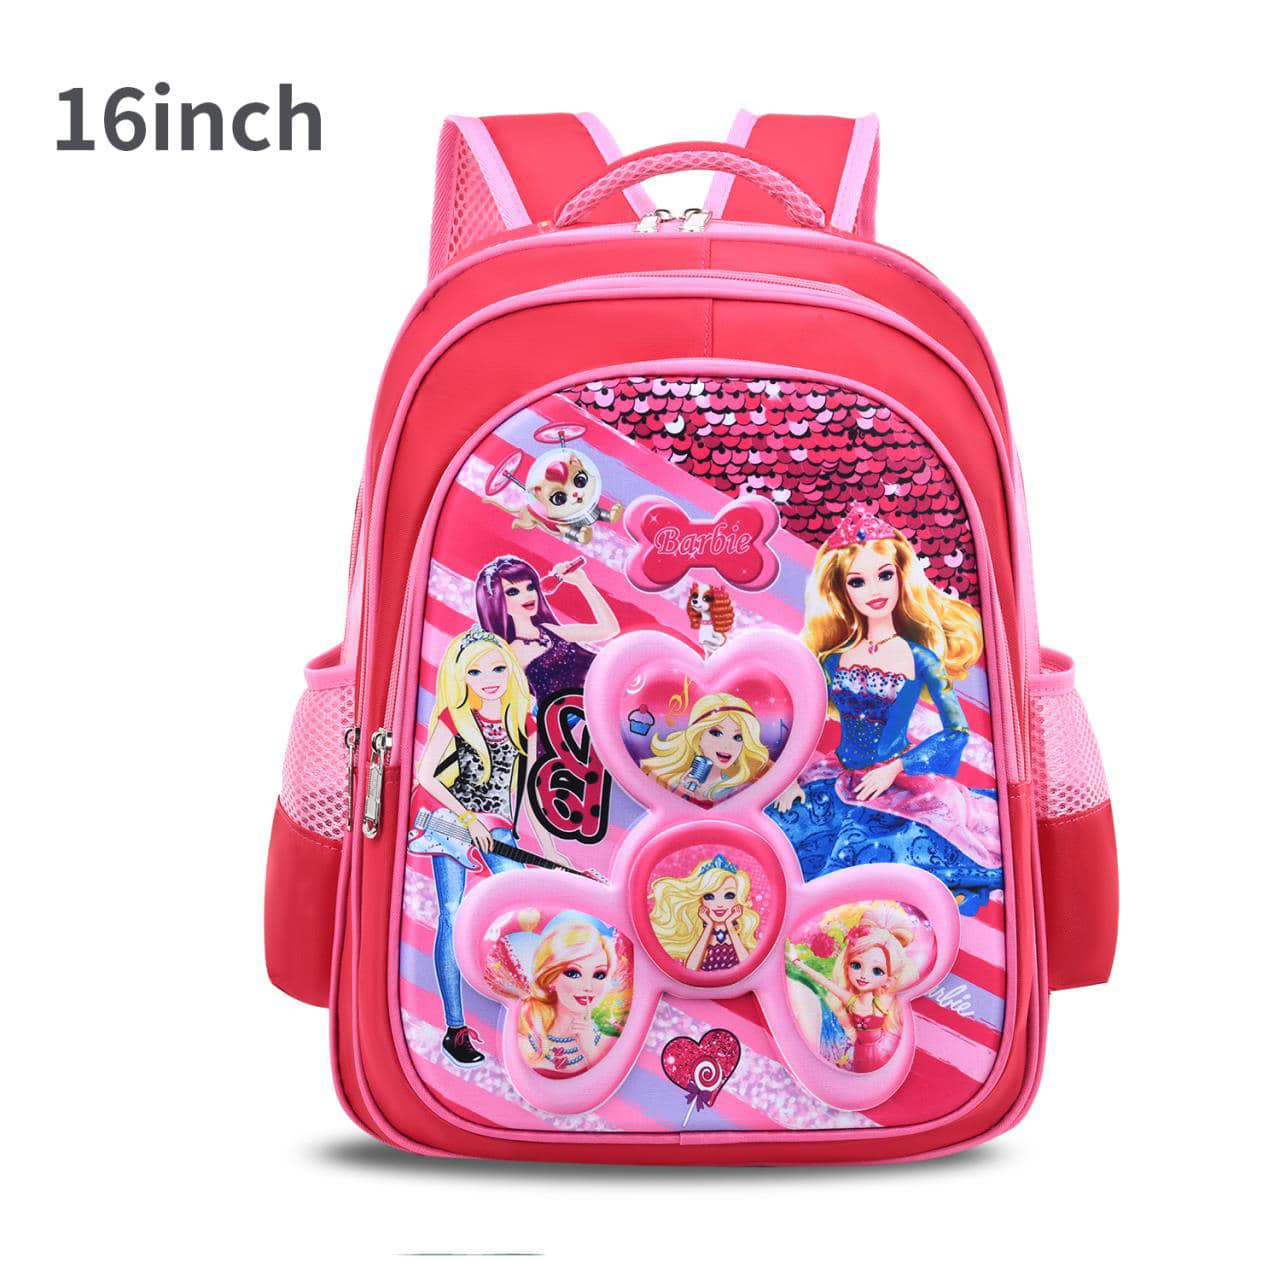 Barbie Future Is Bright School Bag Pink & Black 14 Inches Online in India,  Buy at Best Price from Firstcry.com - 12936102